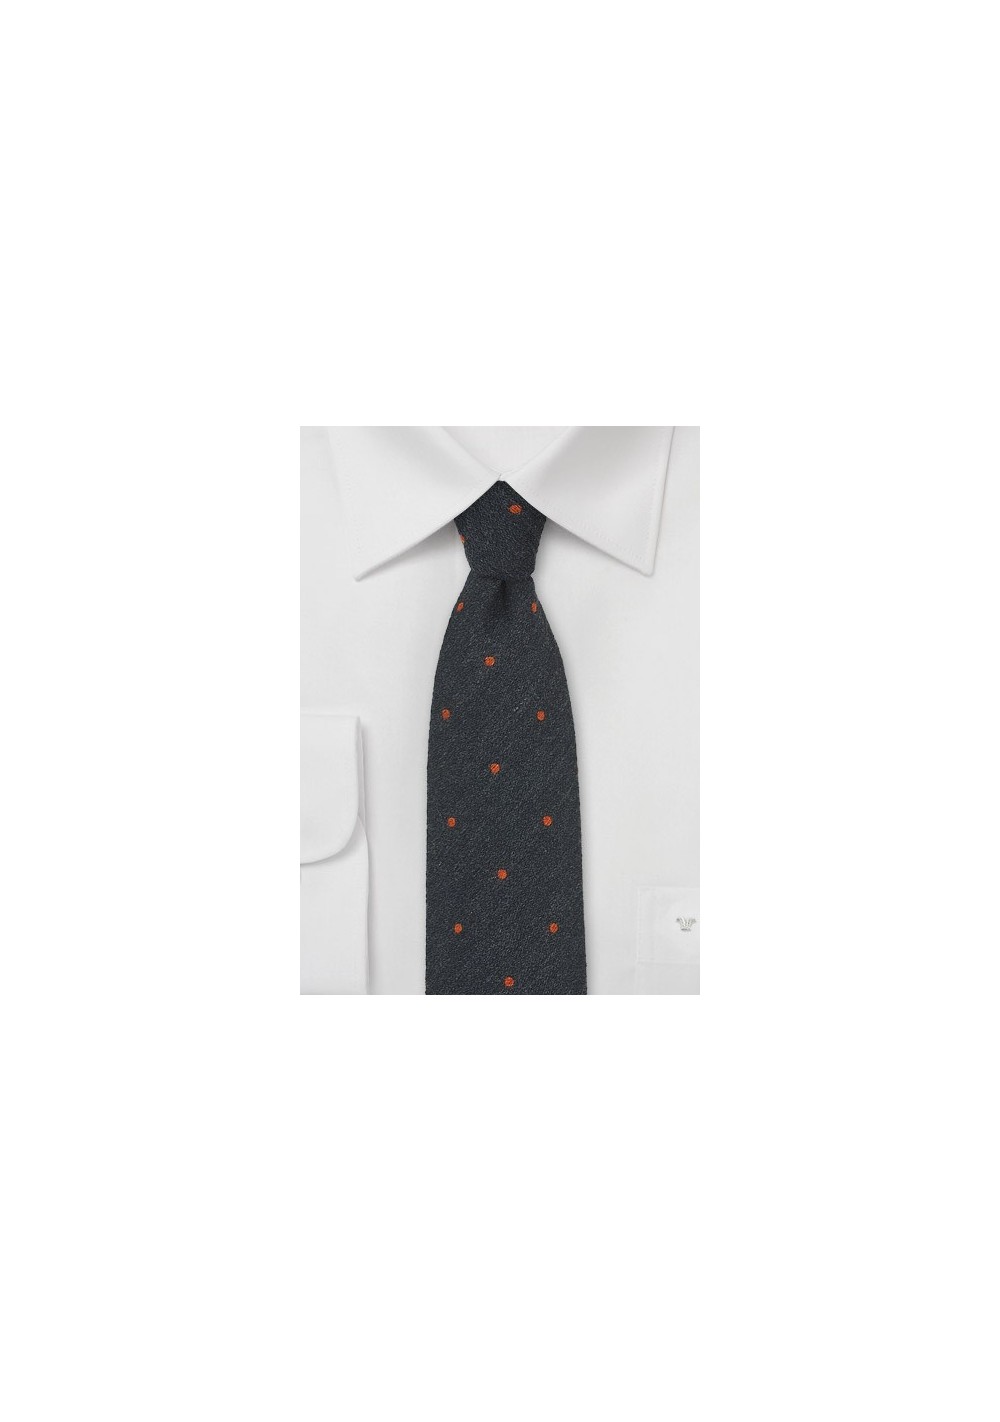 Smoke Gray Tie with Orange Dots in Wool